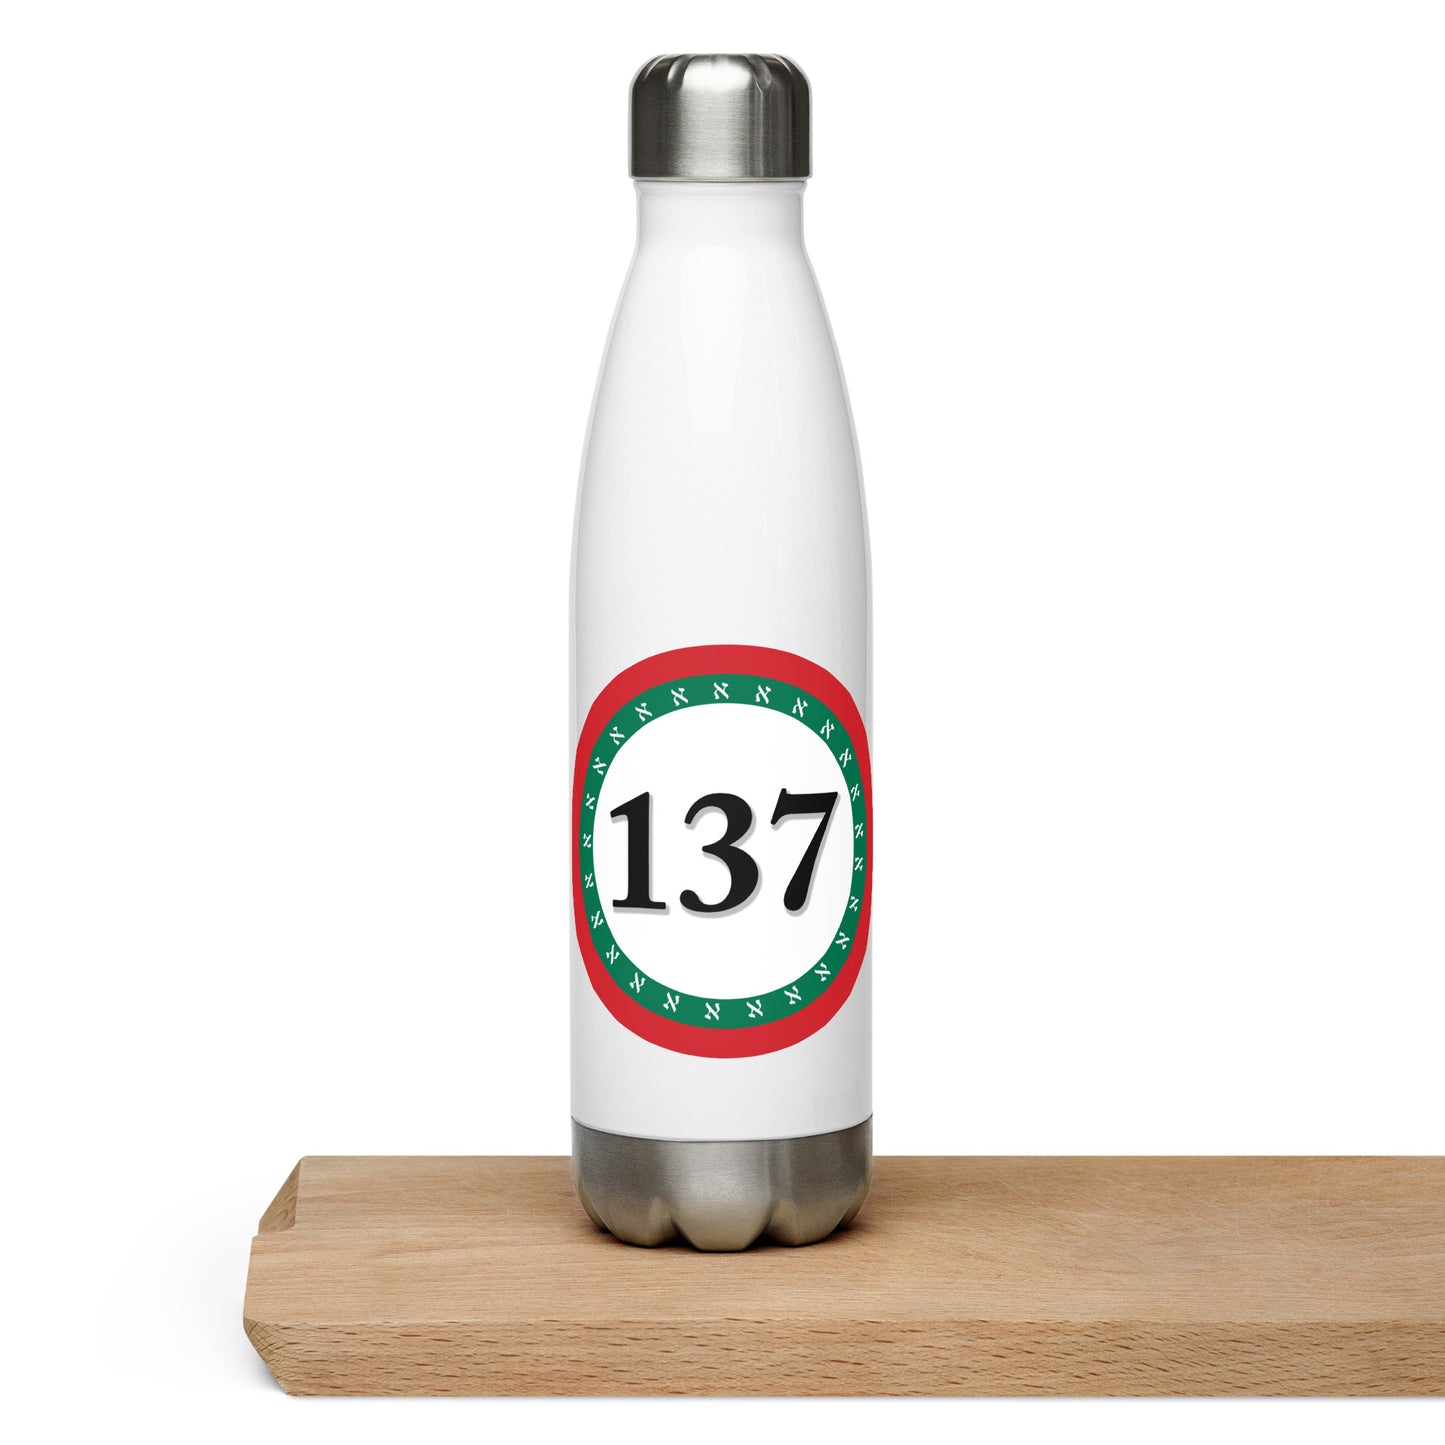  Stainless-Steel-Water-Bottle-17oz-Wht-137 Consciousness-5-137online.com